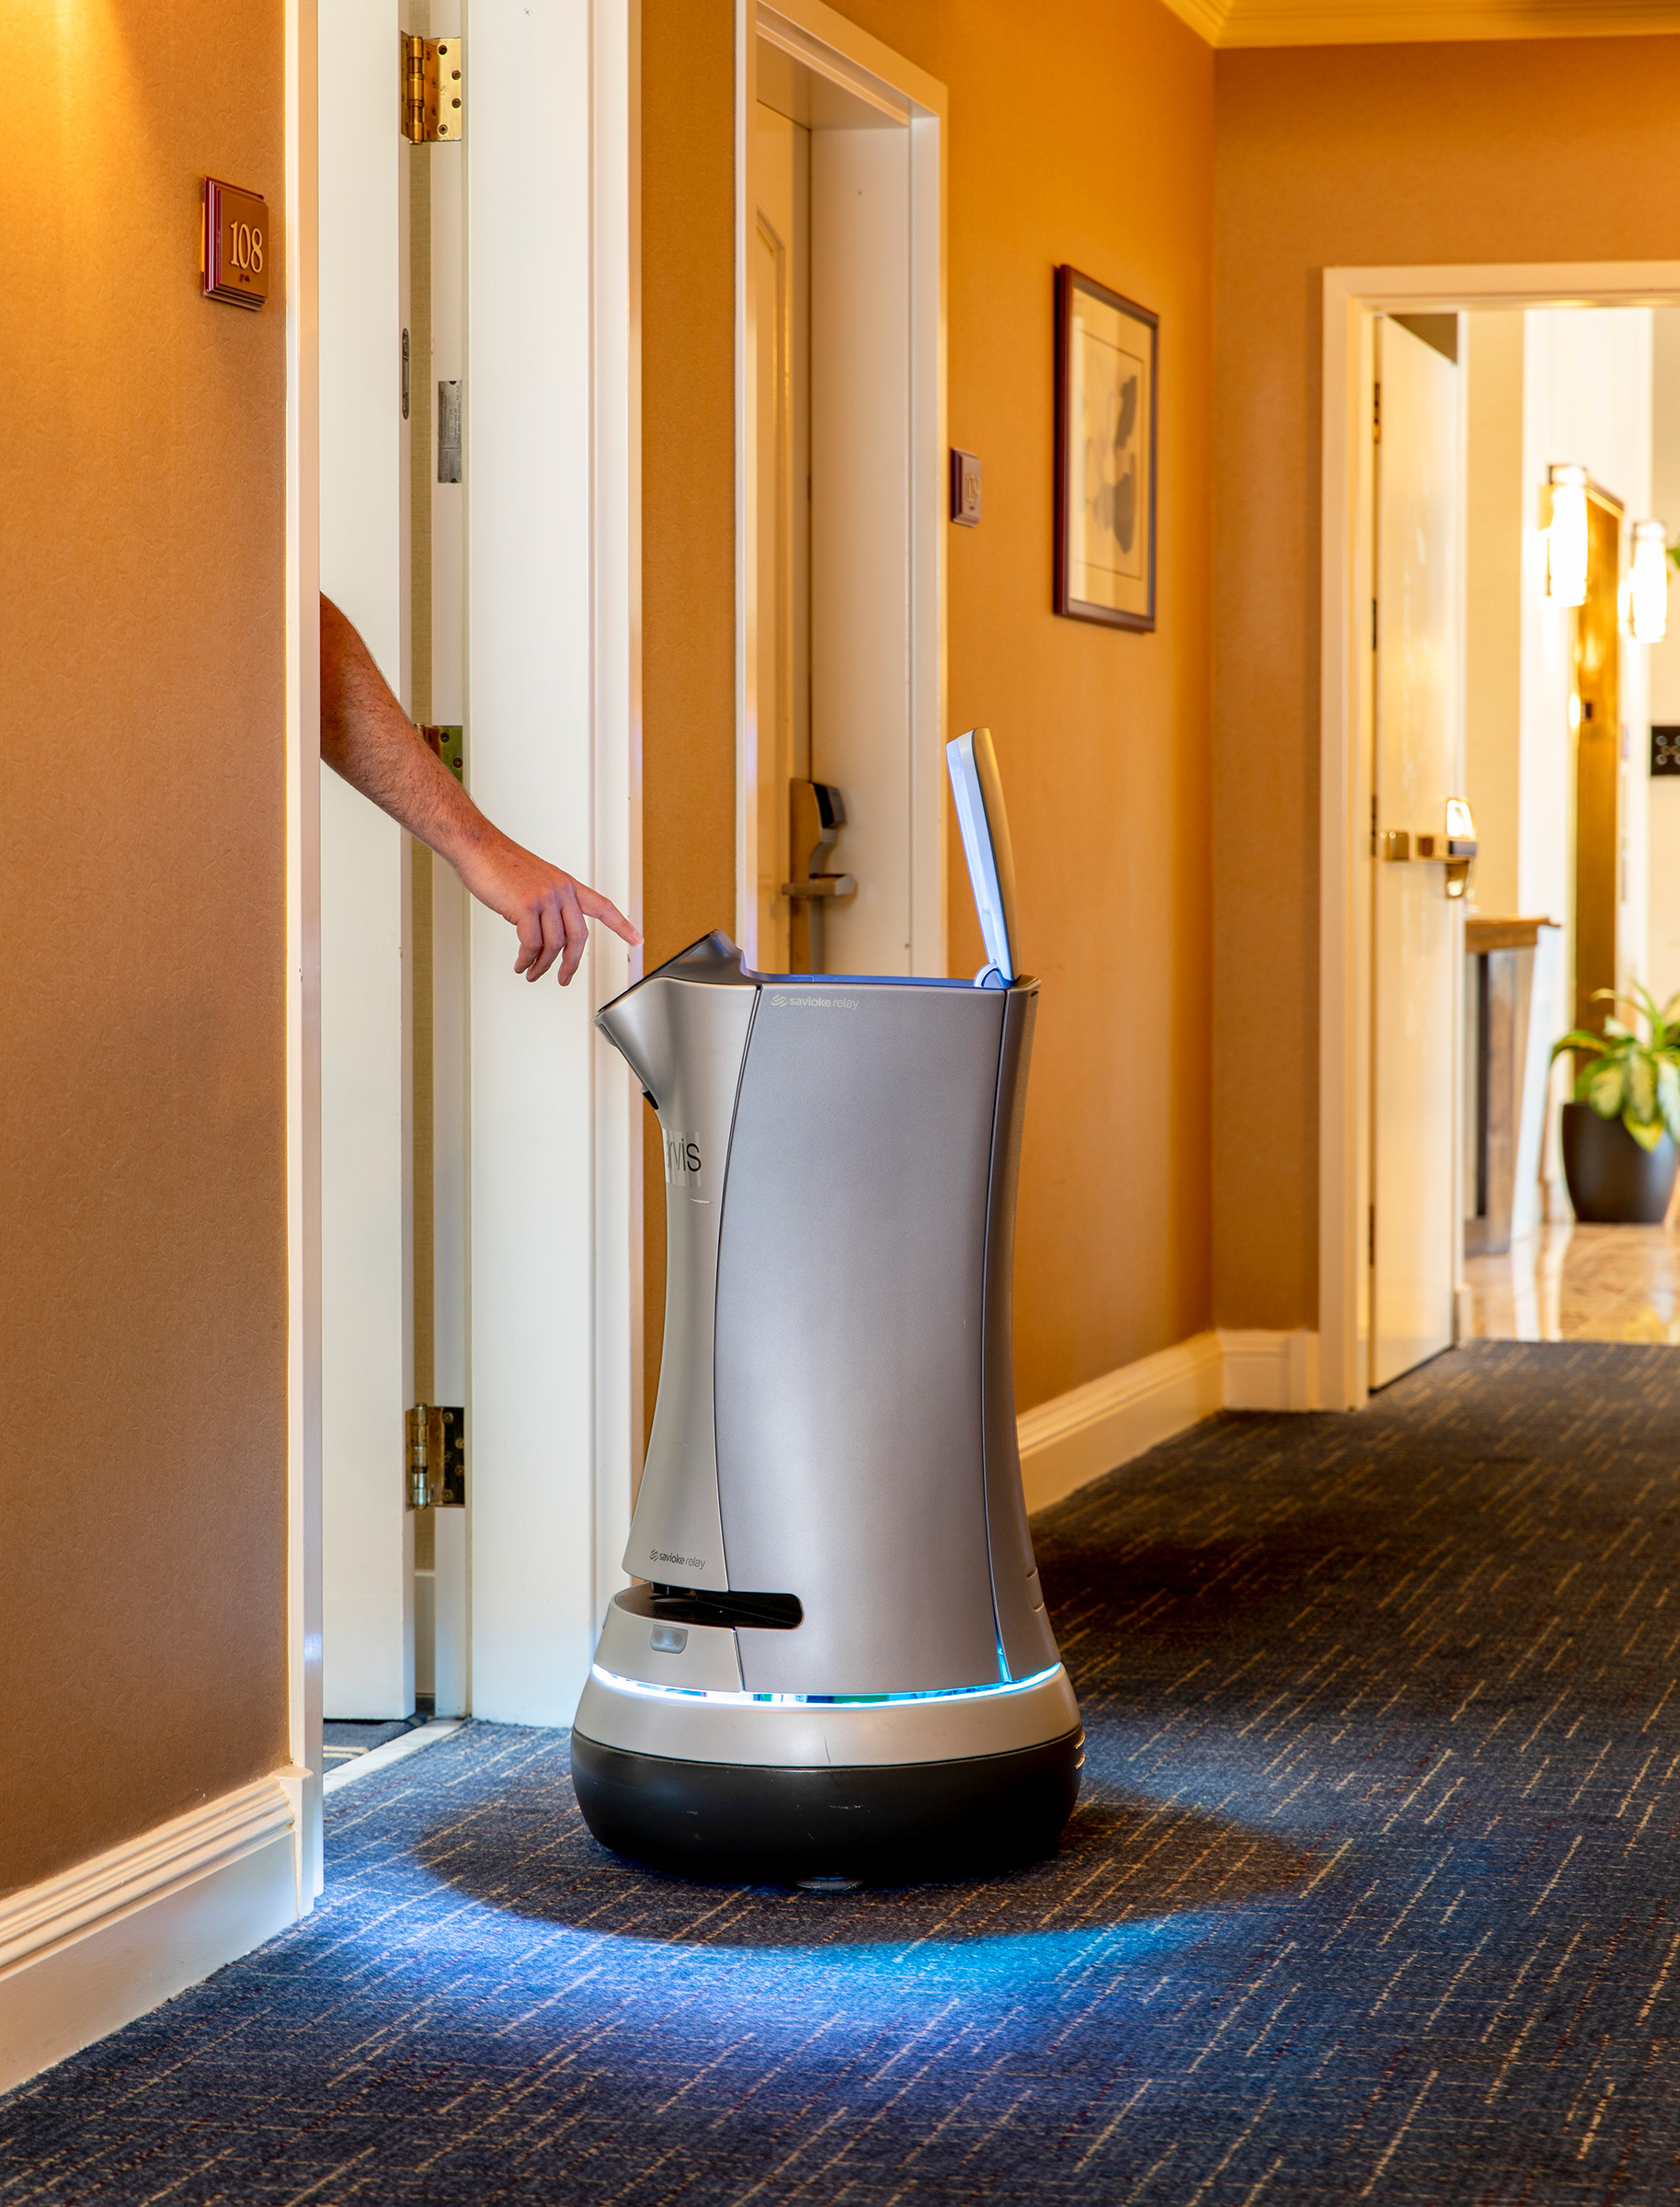 Jarvis the robotic butler on duty at the Grand Hotel in Sunnyvale, Calif., on July 30